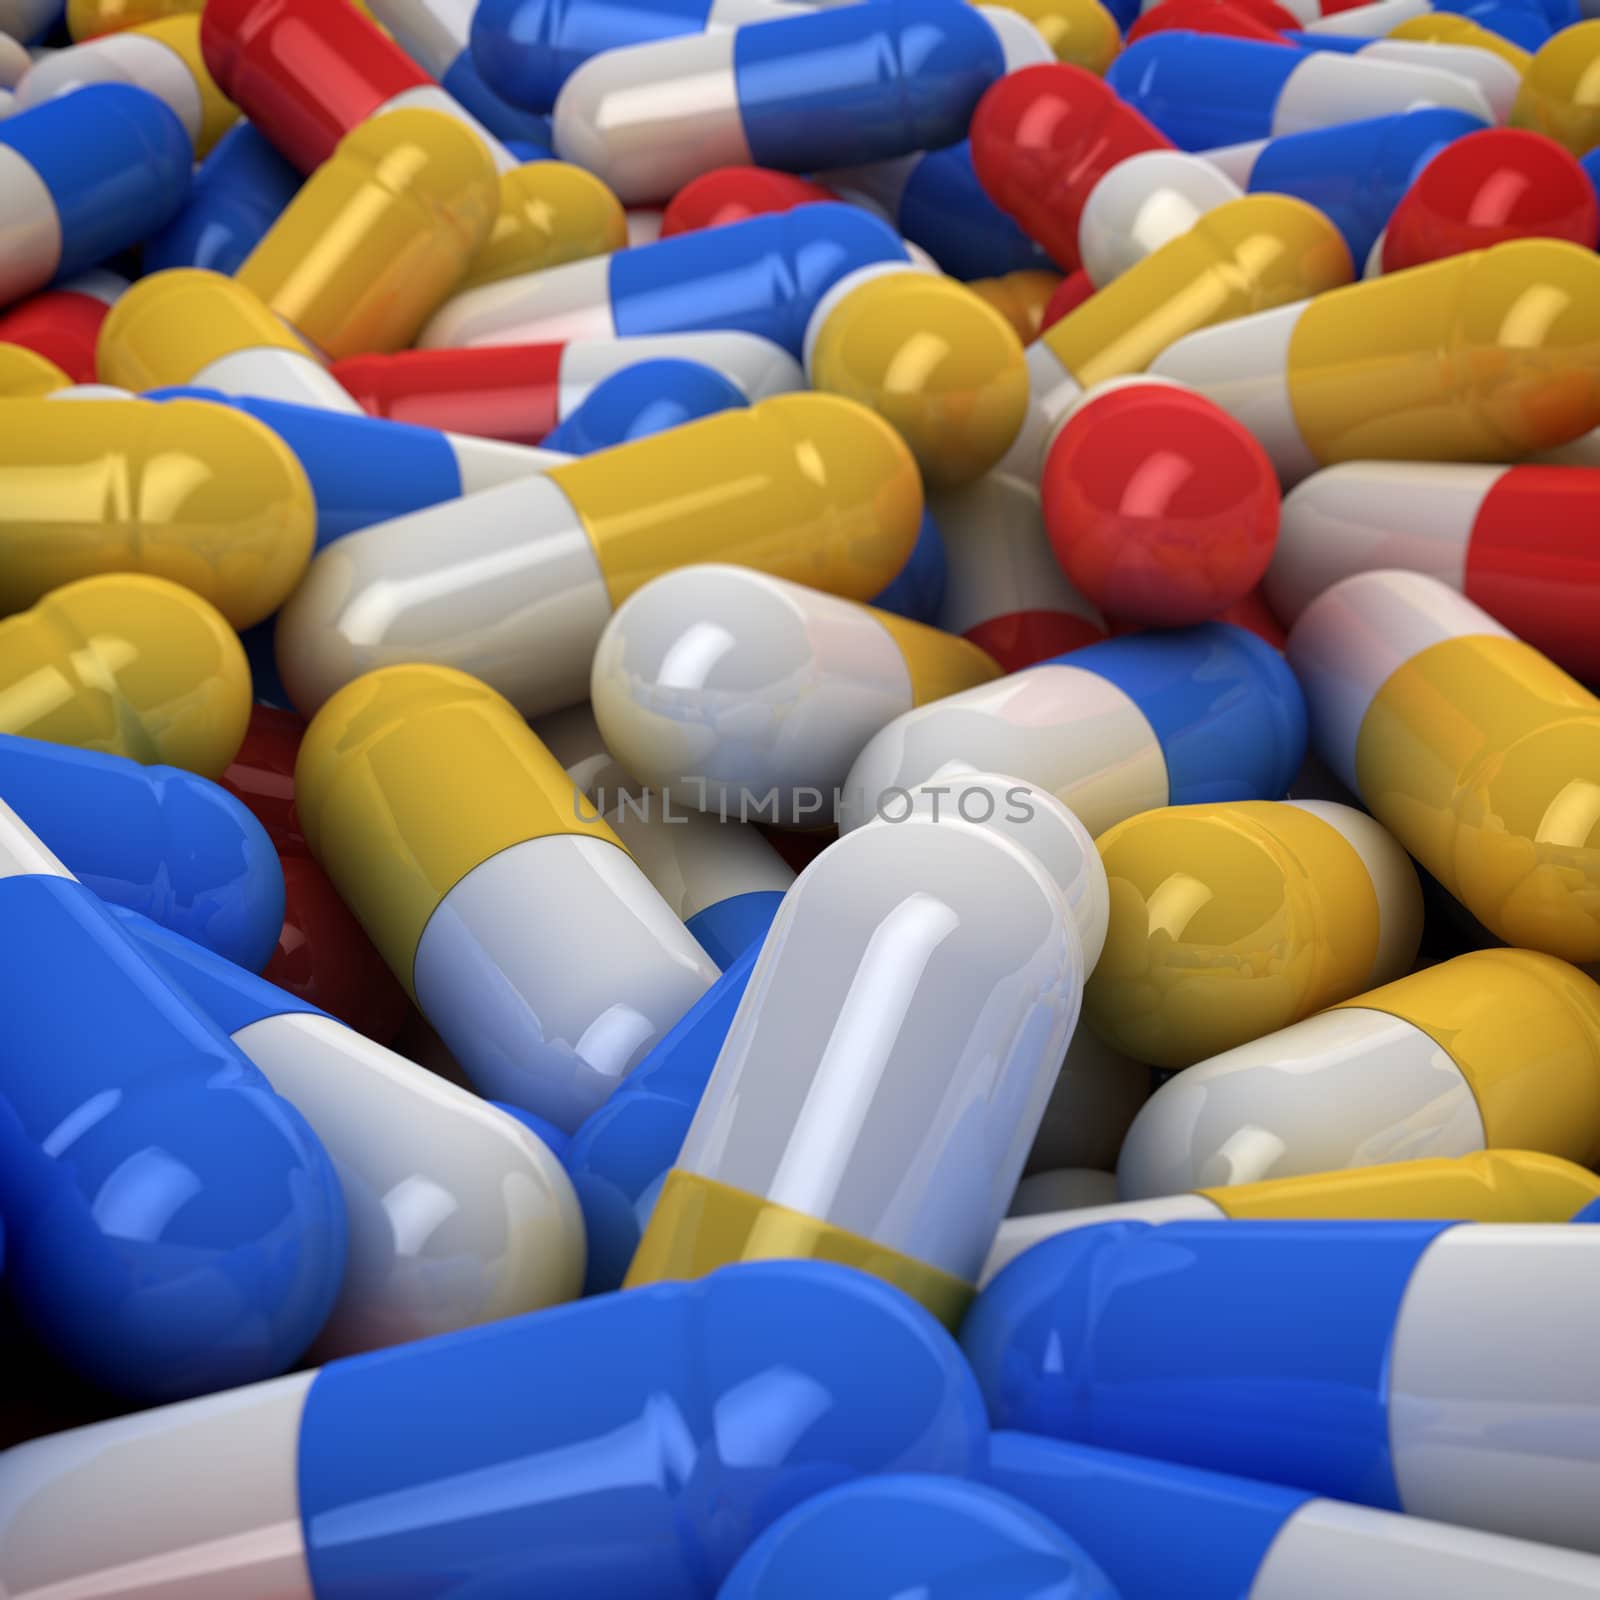 Multicolored capsules background, 3d computer graphic